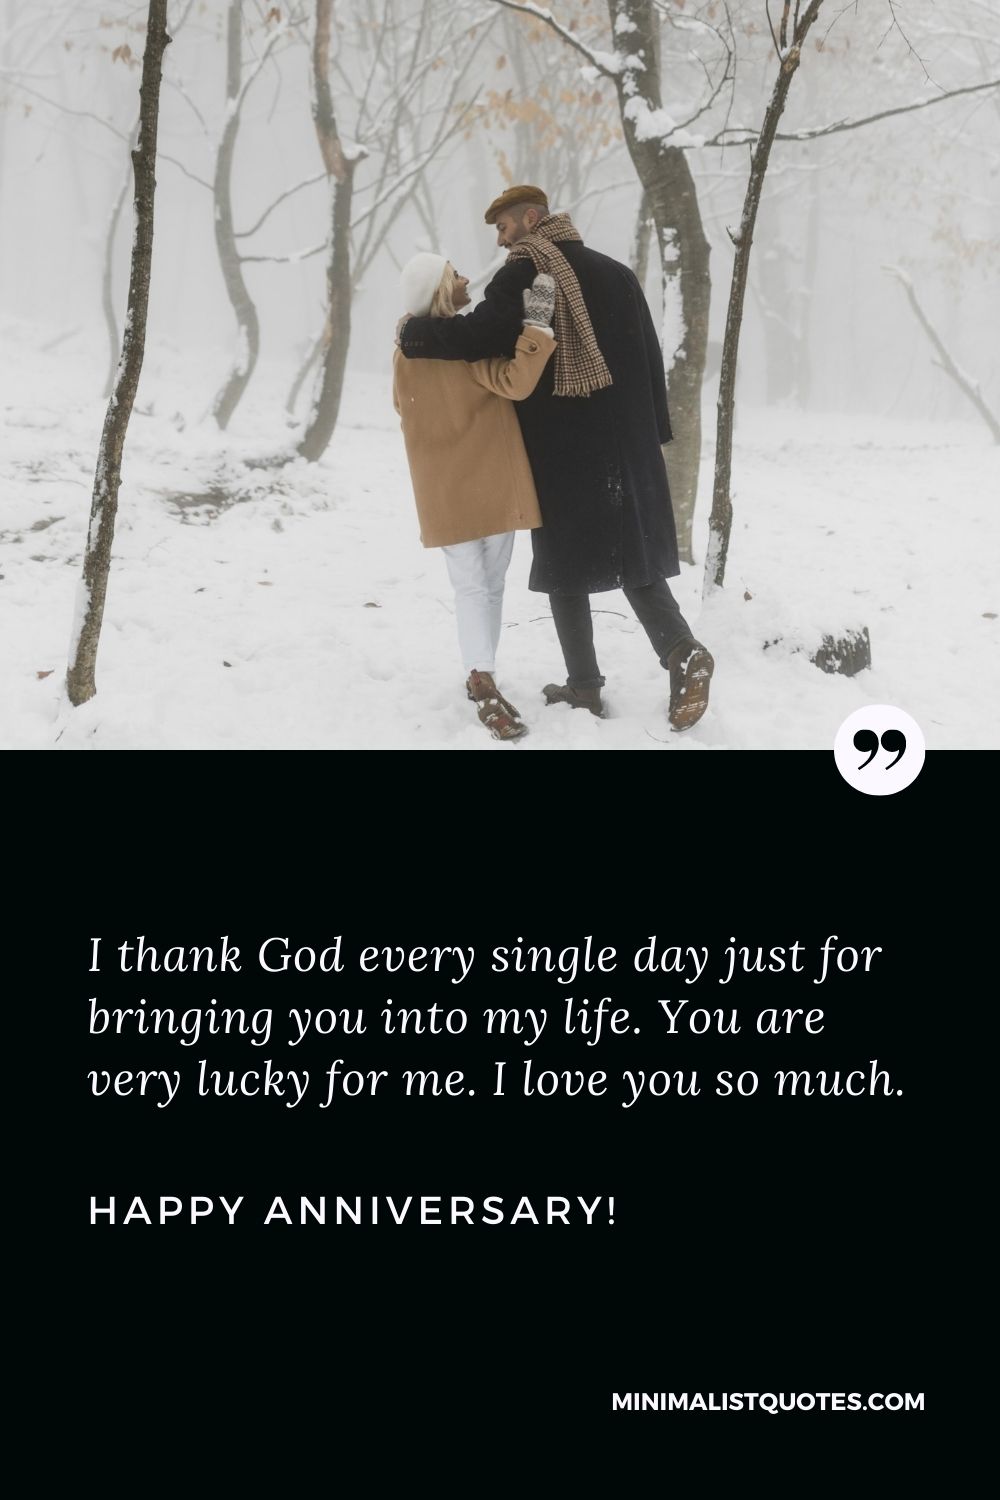 Happy anniversary wife: I thank God every single day just for bringing you into my life. You are very lucky for me. I love you so much. Happy Anniversary!